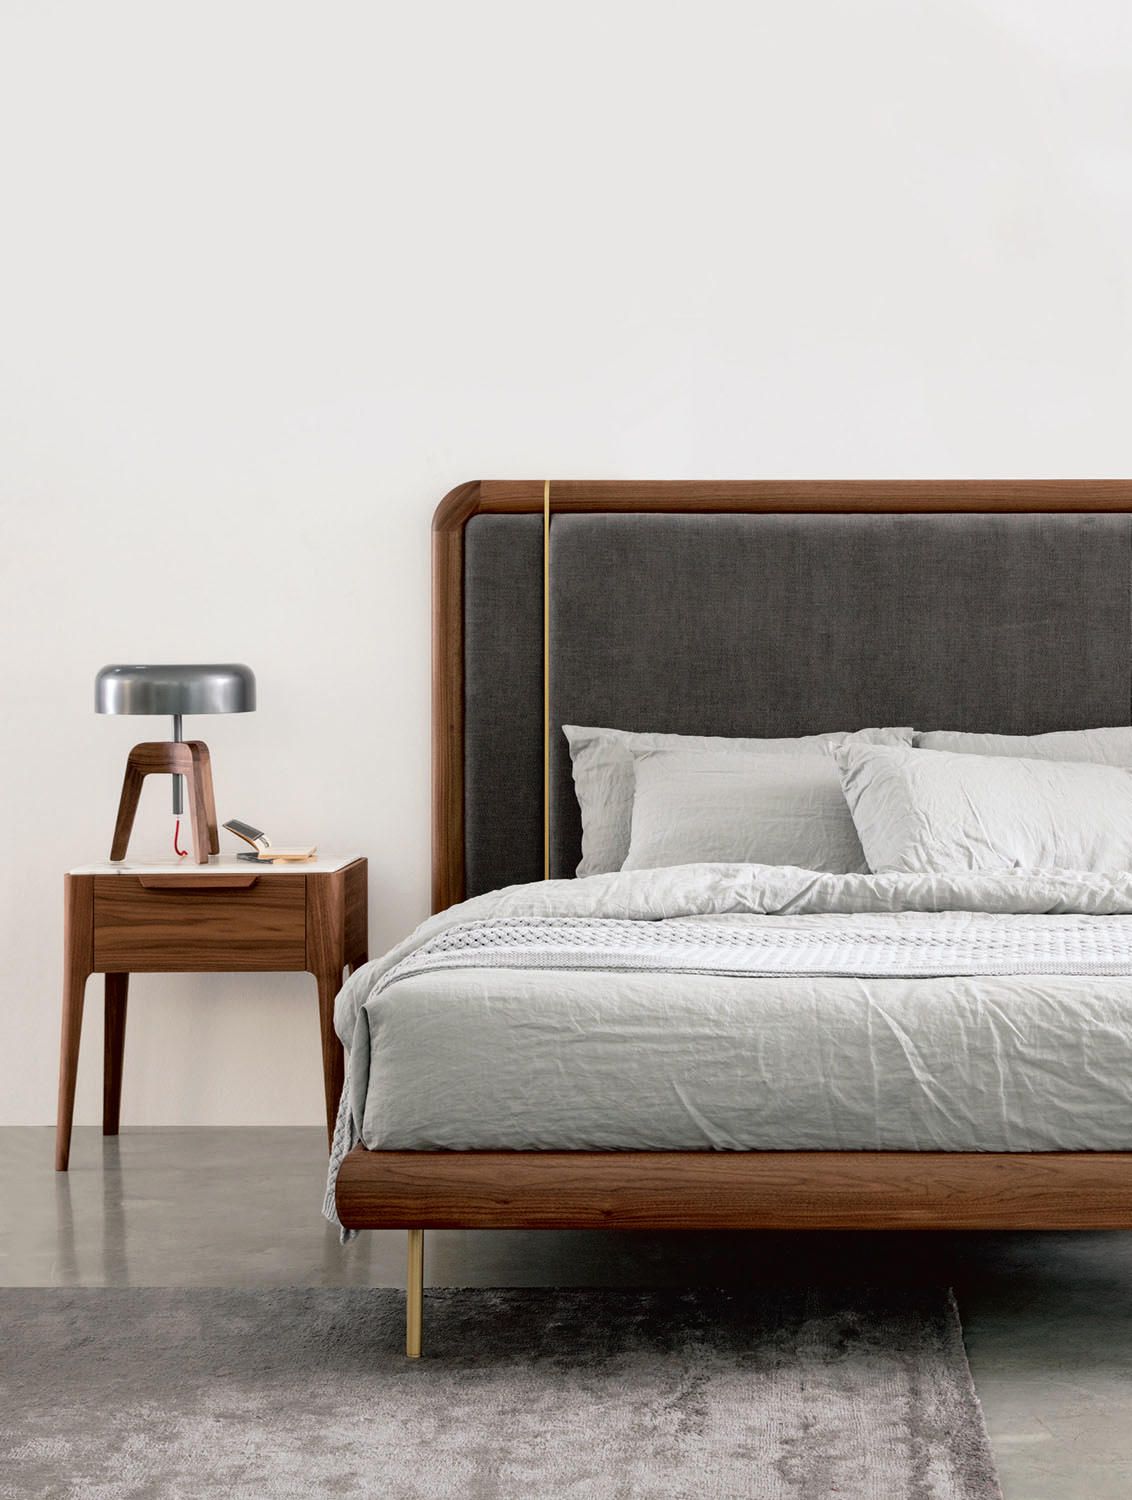 Bed Headboard Designs: Adding Style and Comfort to Your Bedroom Sanctuary